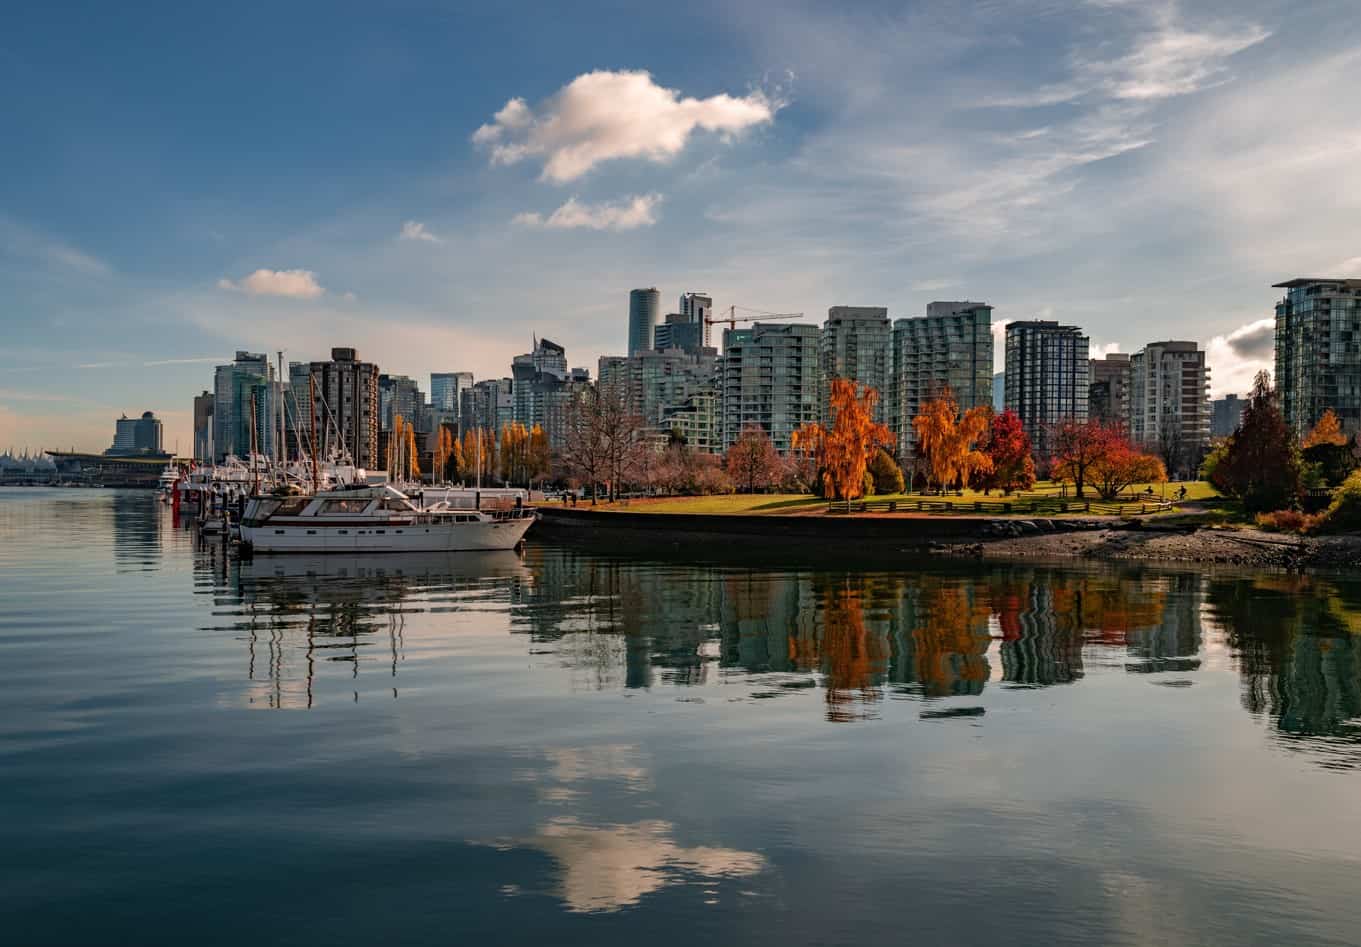 Discover Vancouver Scenic Beauty While Hosting An Event On The Burrard Queen Charter